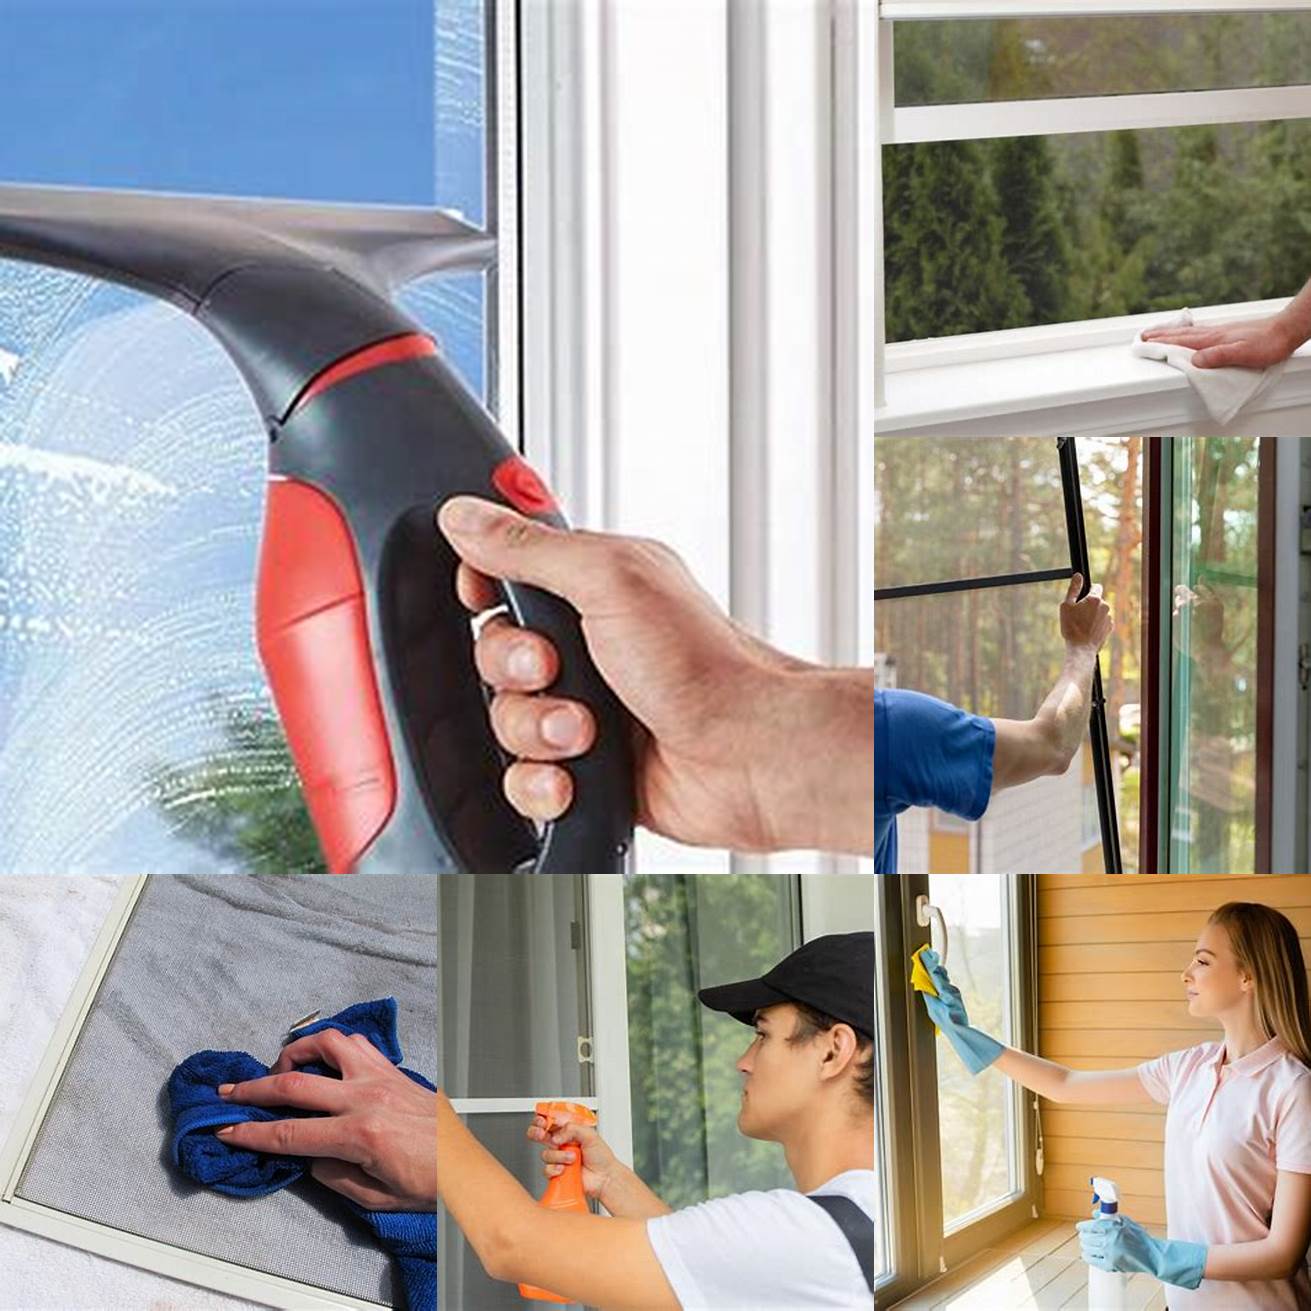 Cleaning windows and screens